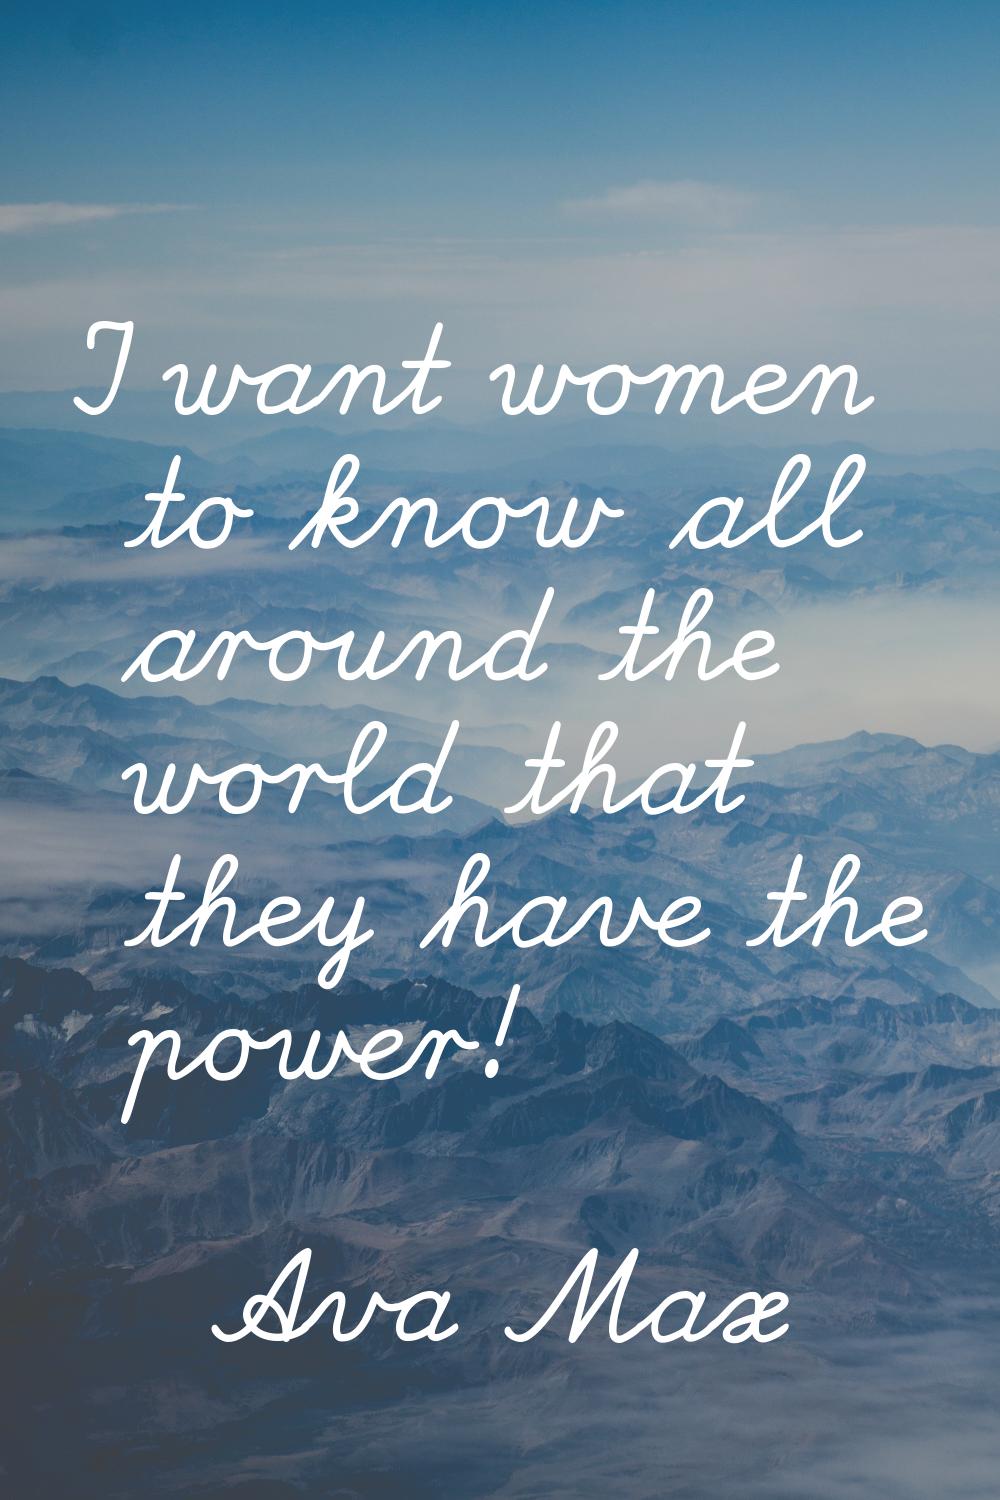 I want women to know all around the world that they have the power!